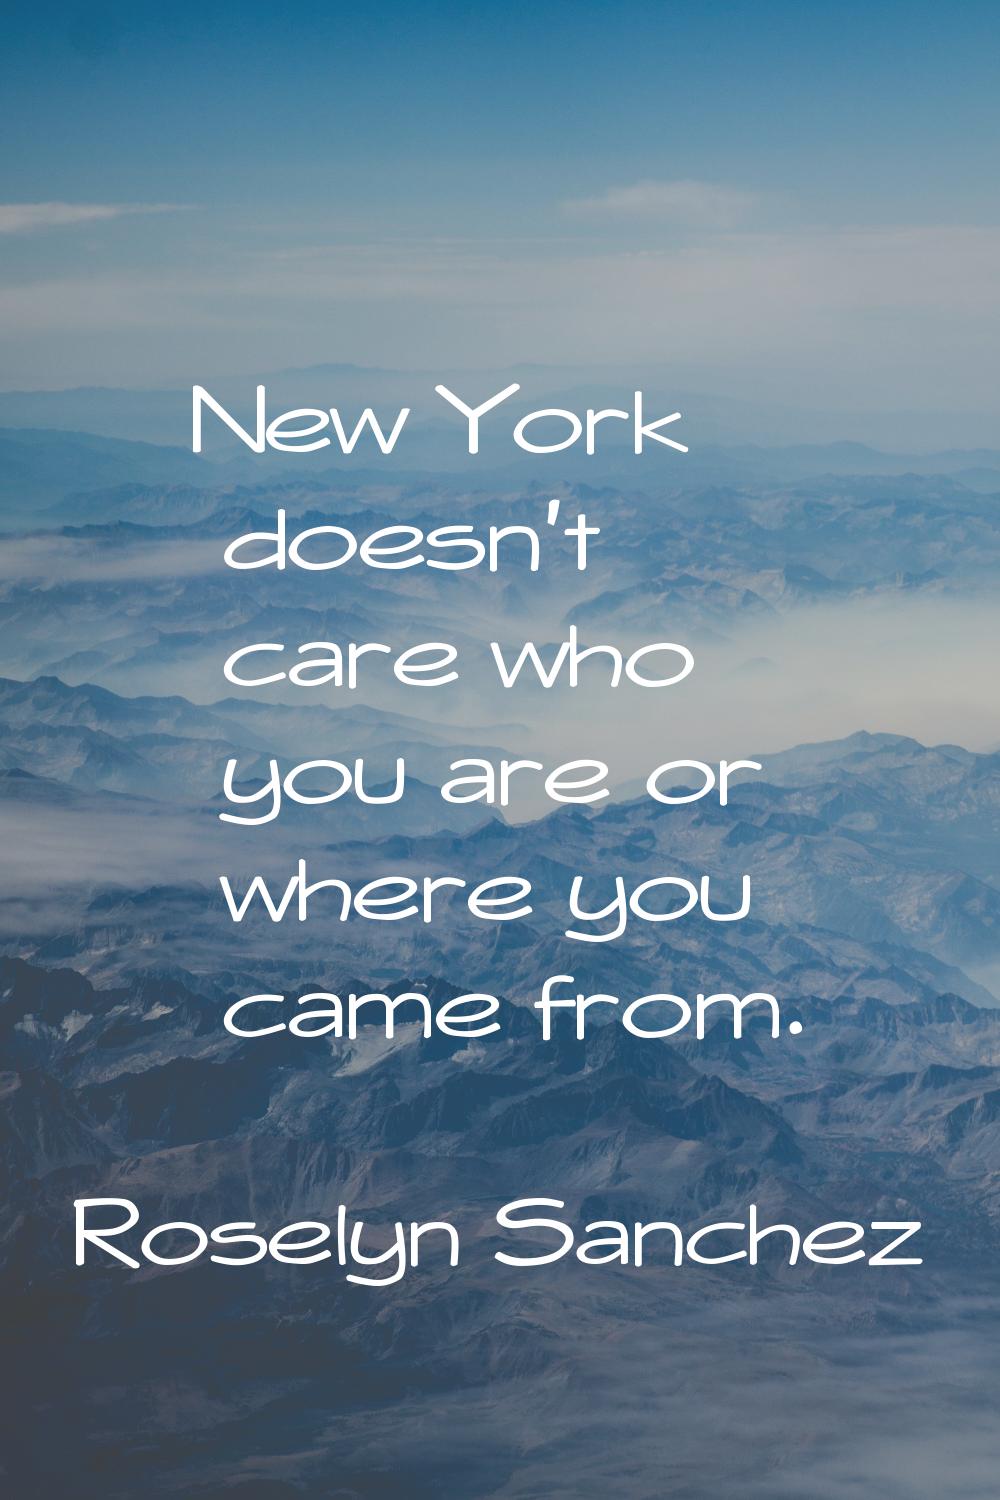 New York doesn't care who you are or where you came from.